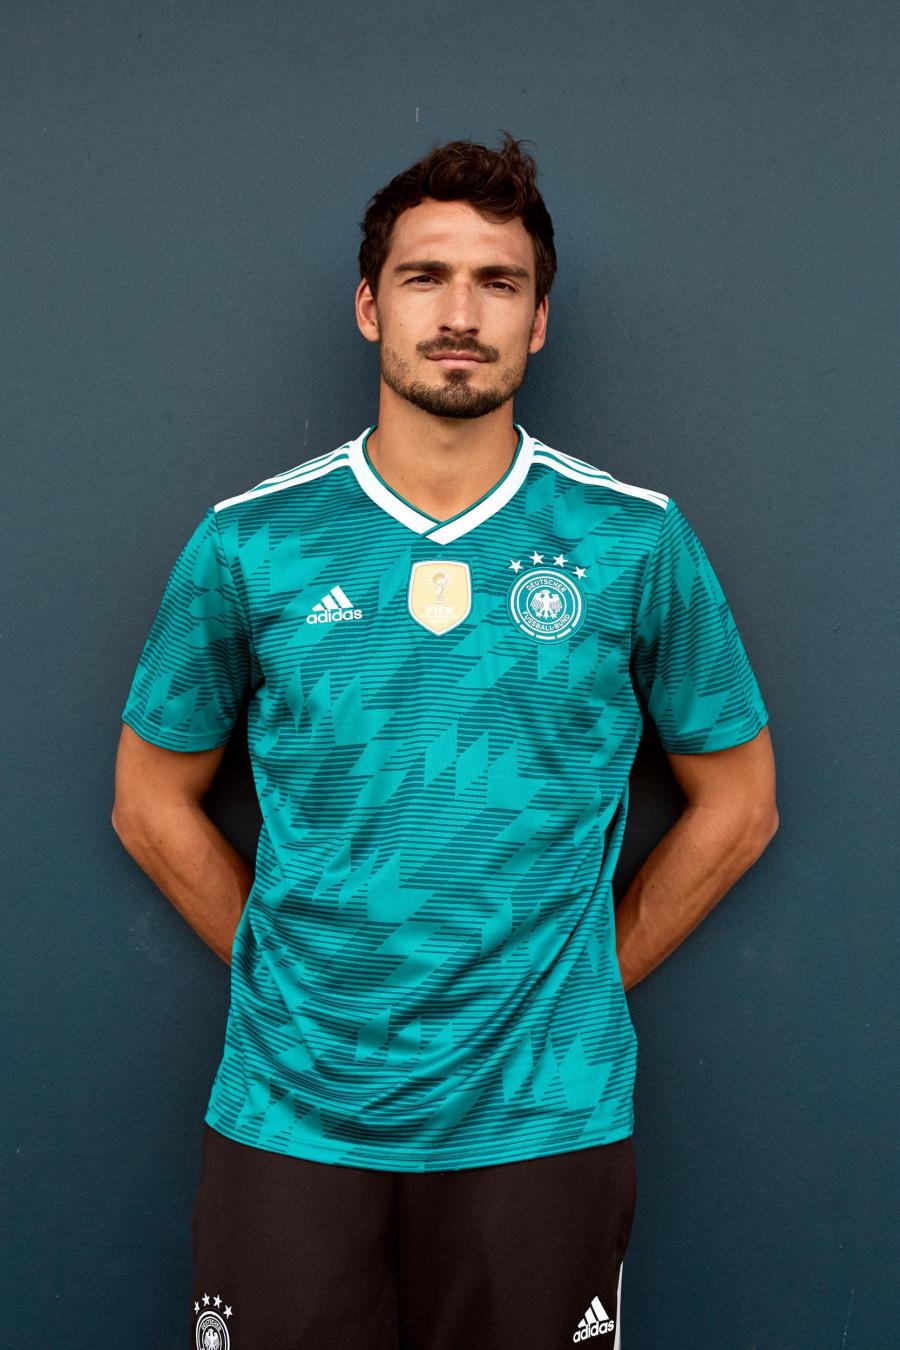 The Nine Adidas World Cup Away Jerseys Ranked | Balls.ie